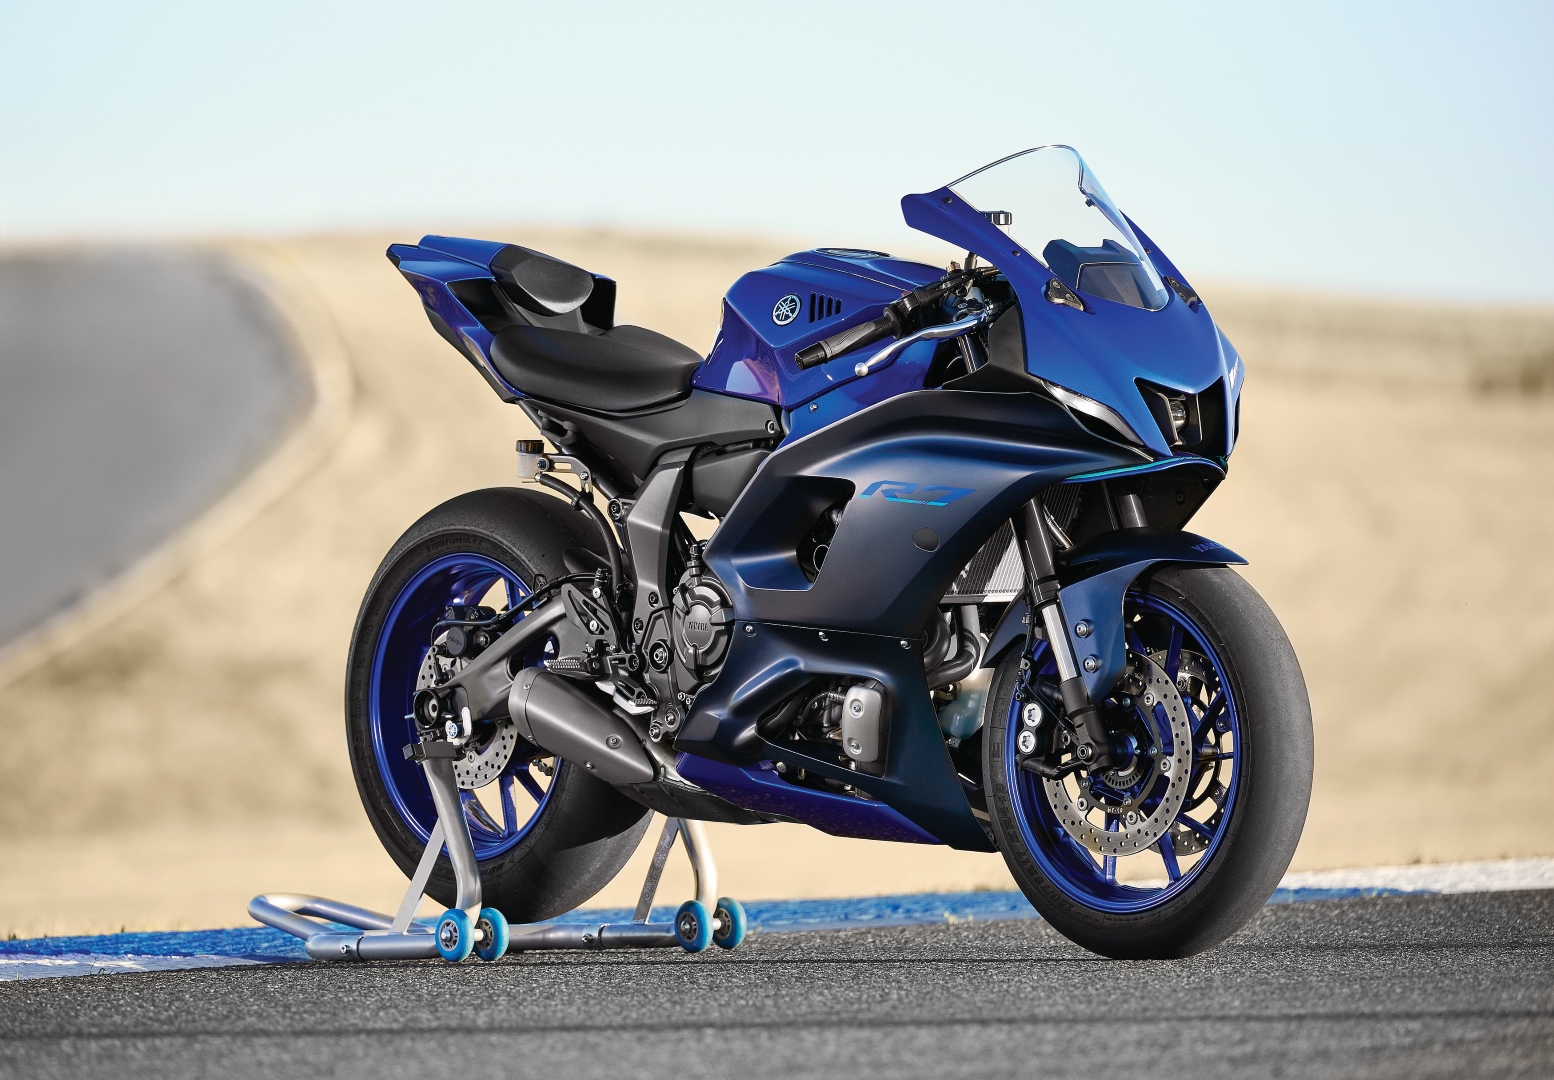 2022 Yamaha YZF-R7 : The Supersport bike that everyone is searching for